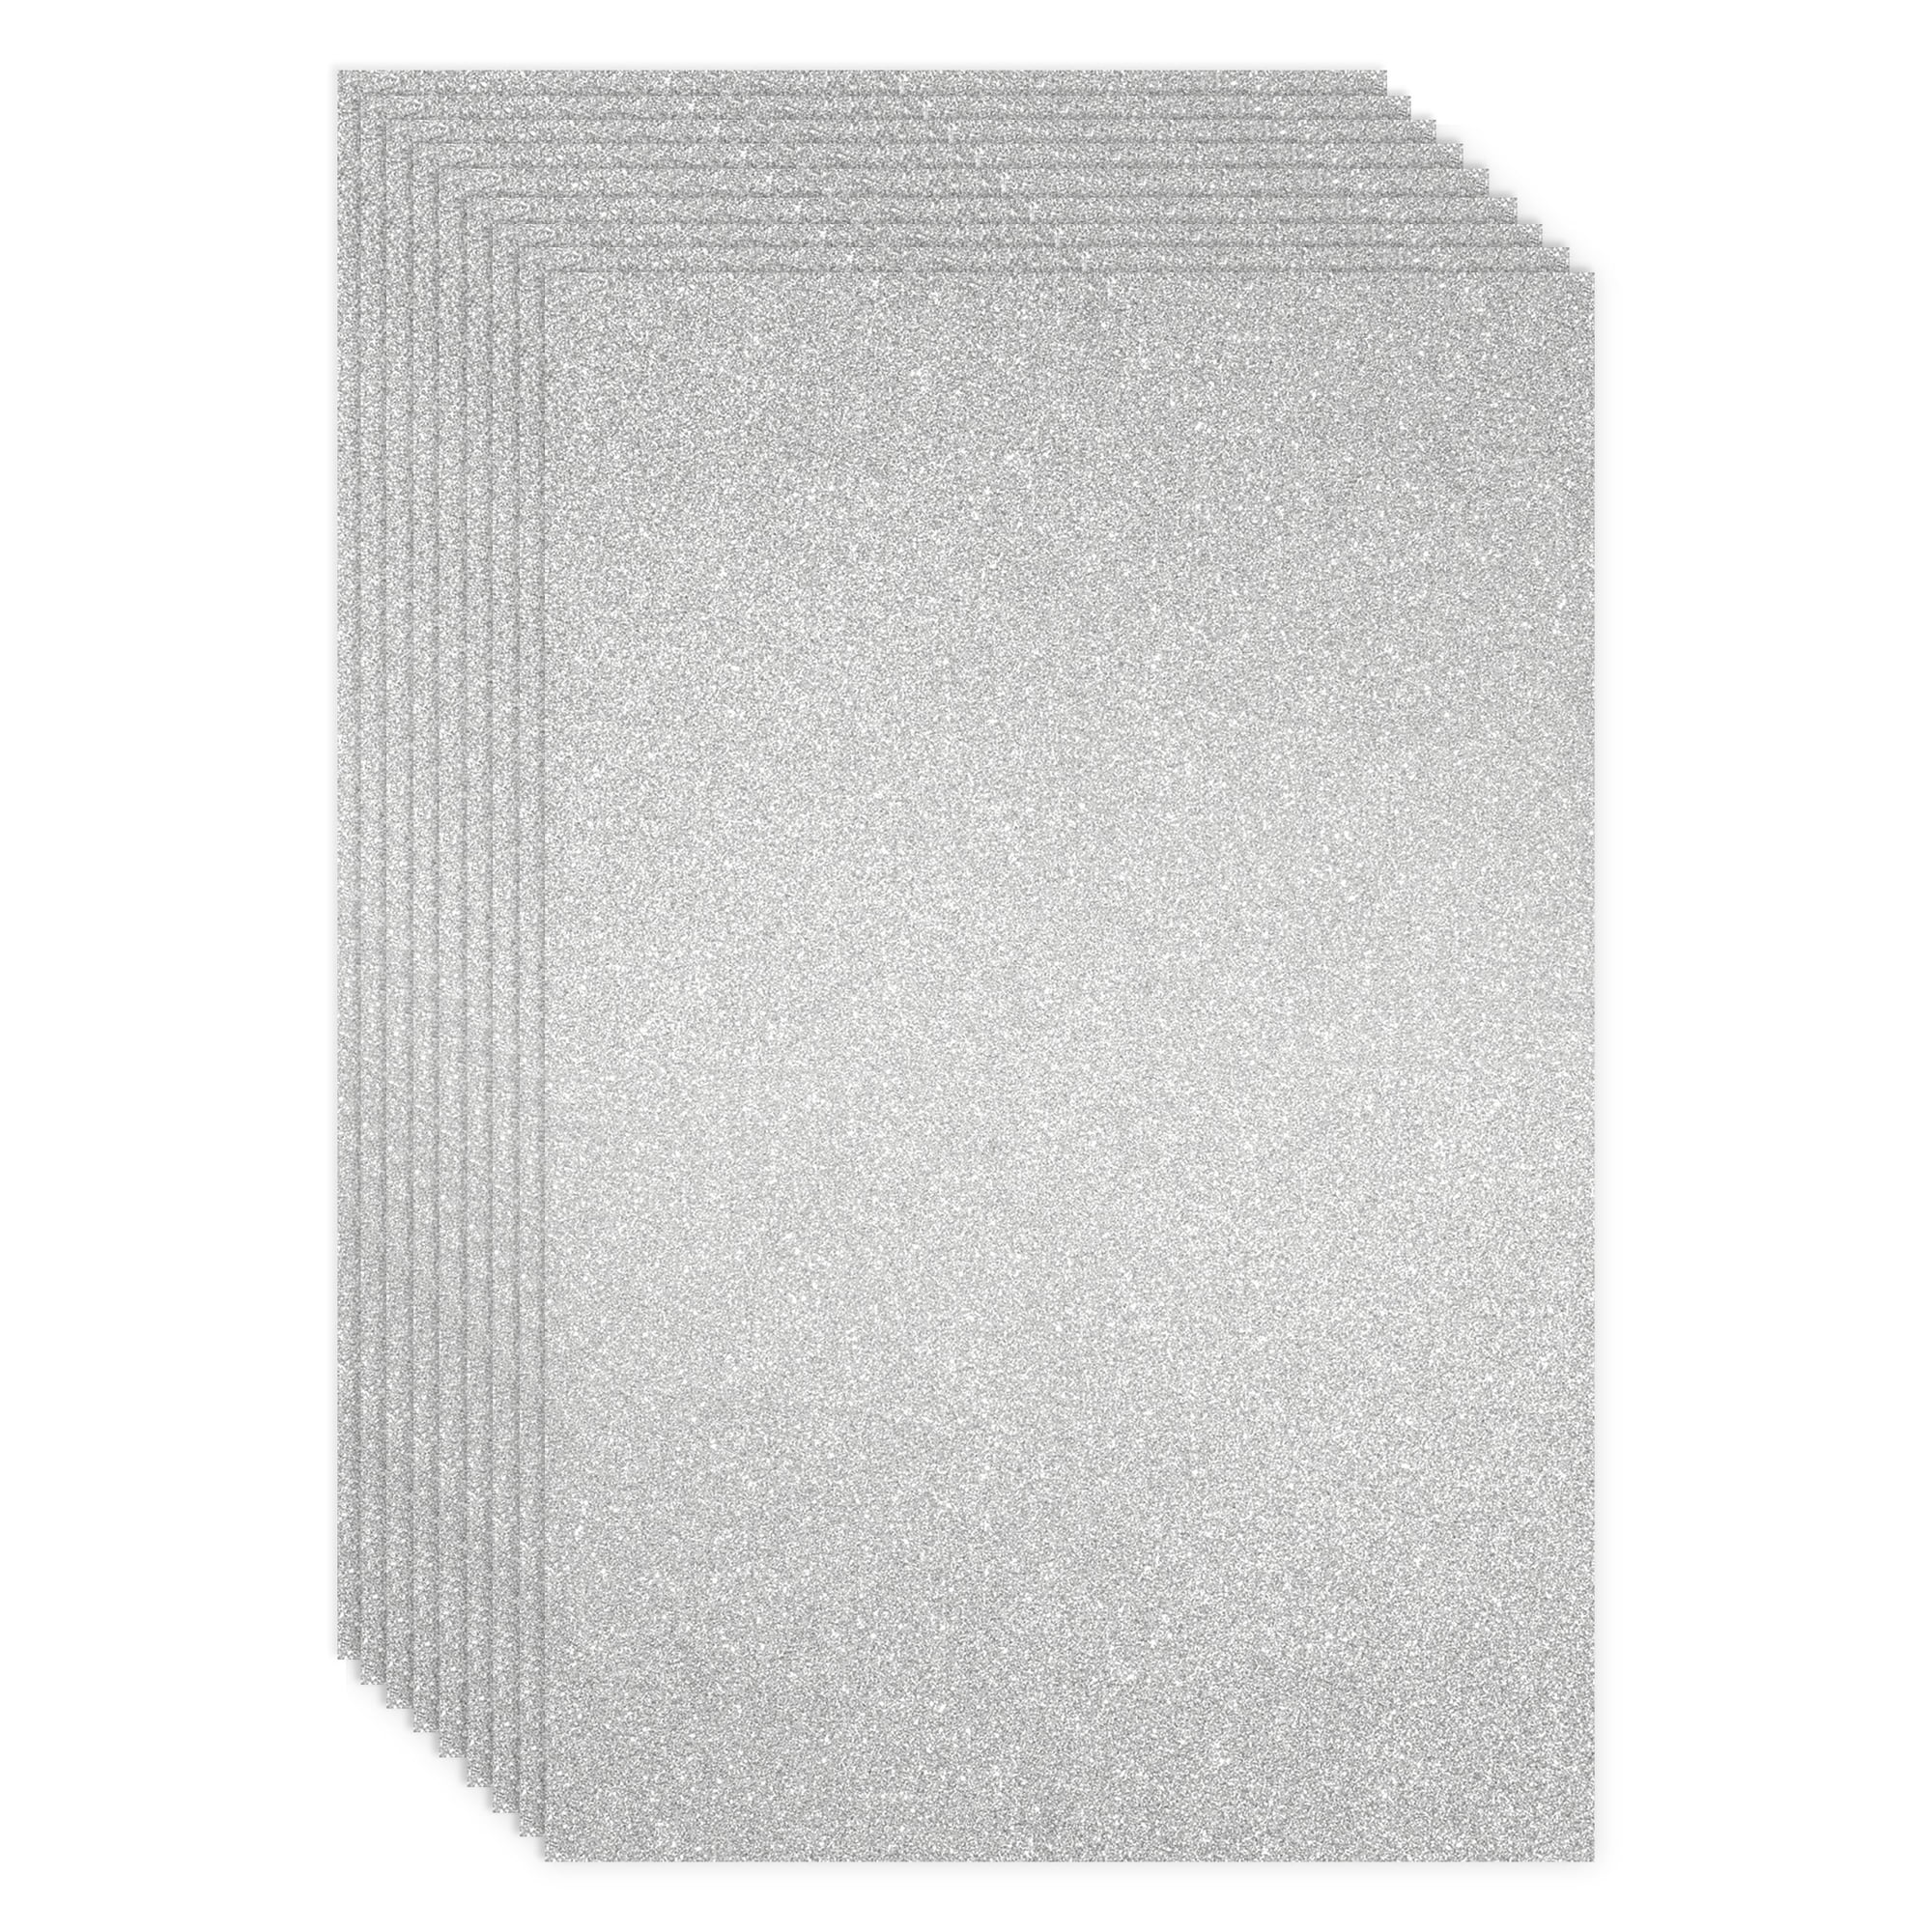 levylisa 10 Sheets 8 x 12 Glitter Card 250gms Premium Card Sparkling  Craft Cardstock Cardmaker DIY Gift Box Wrapping (Silver)